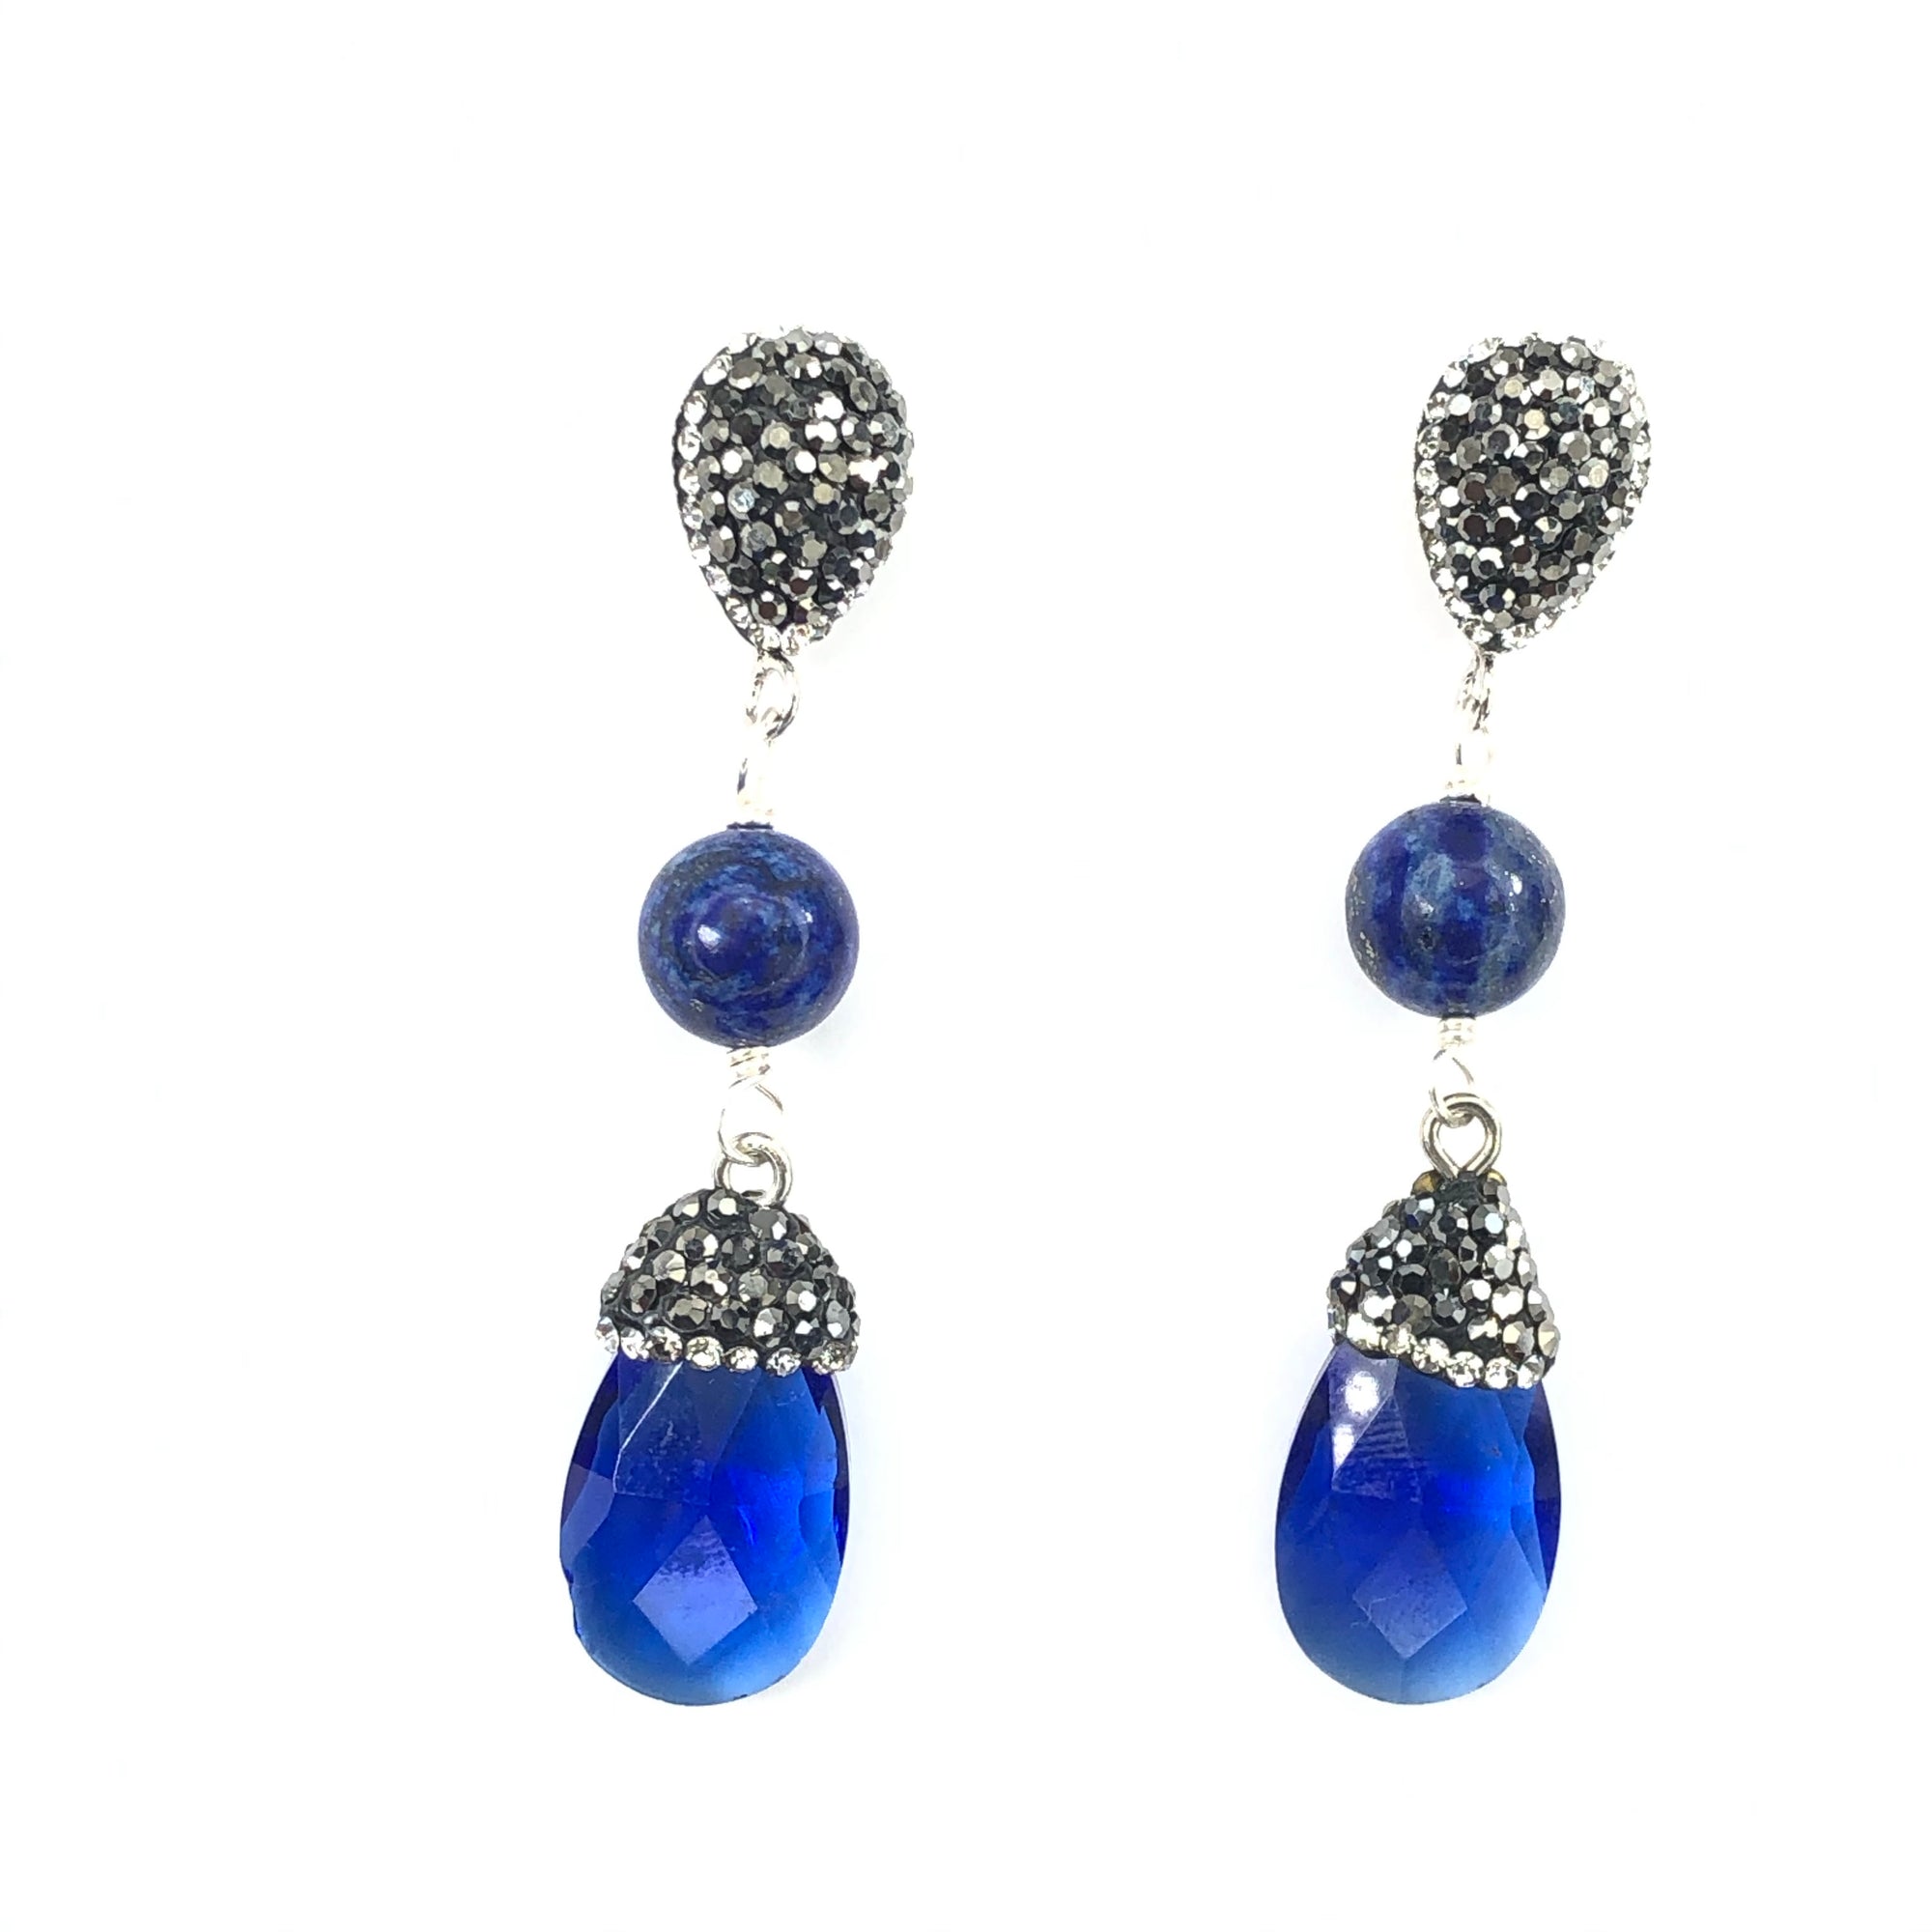 Lady's Love Earrings Earrings Cerese D, Inc. Lapis and Crystal Pave  